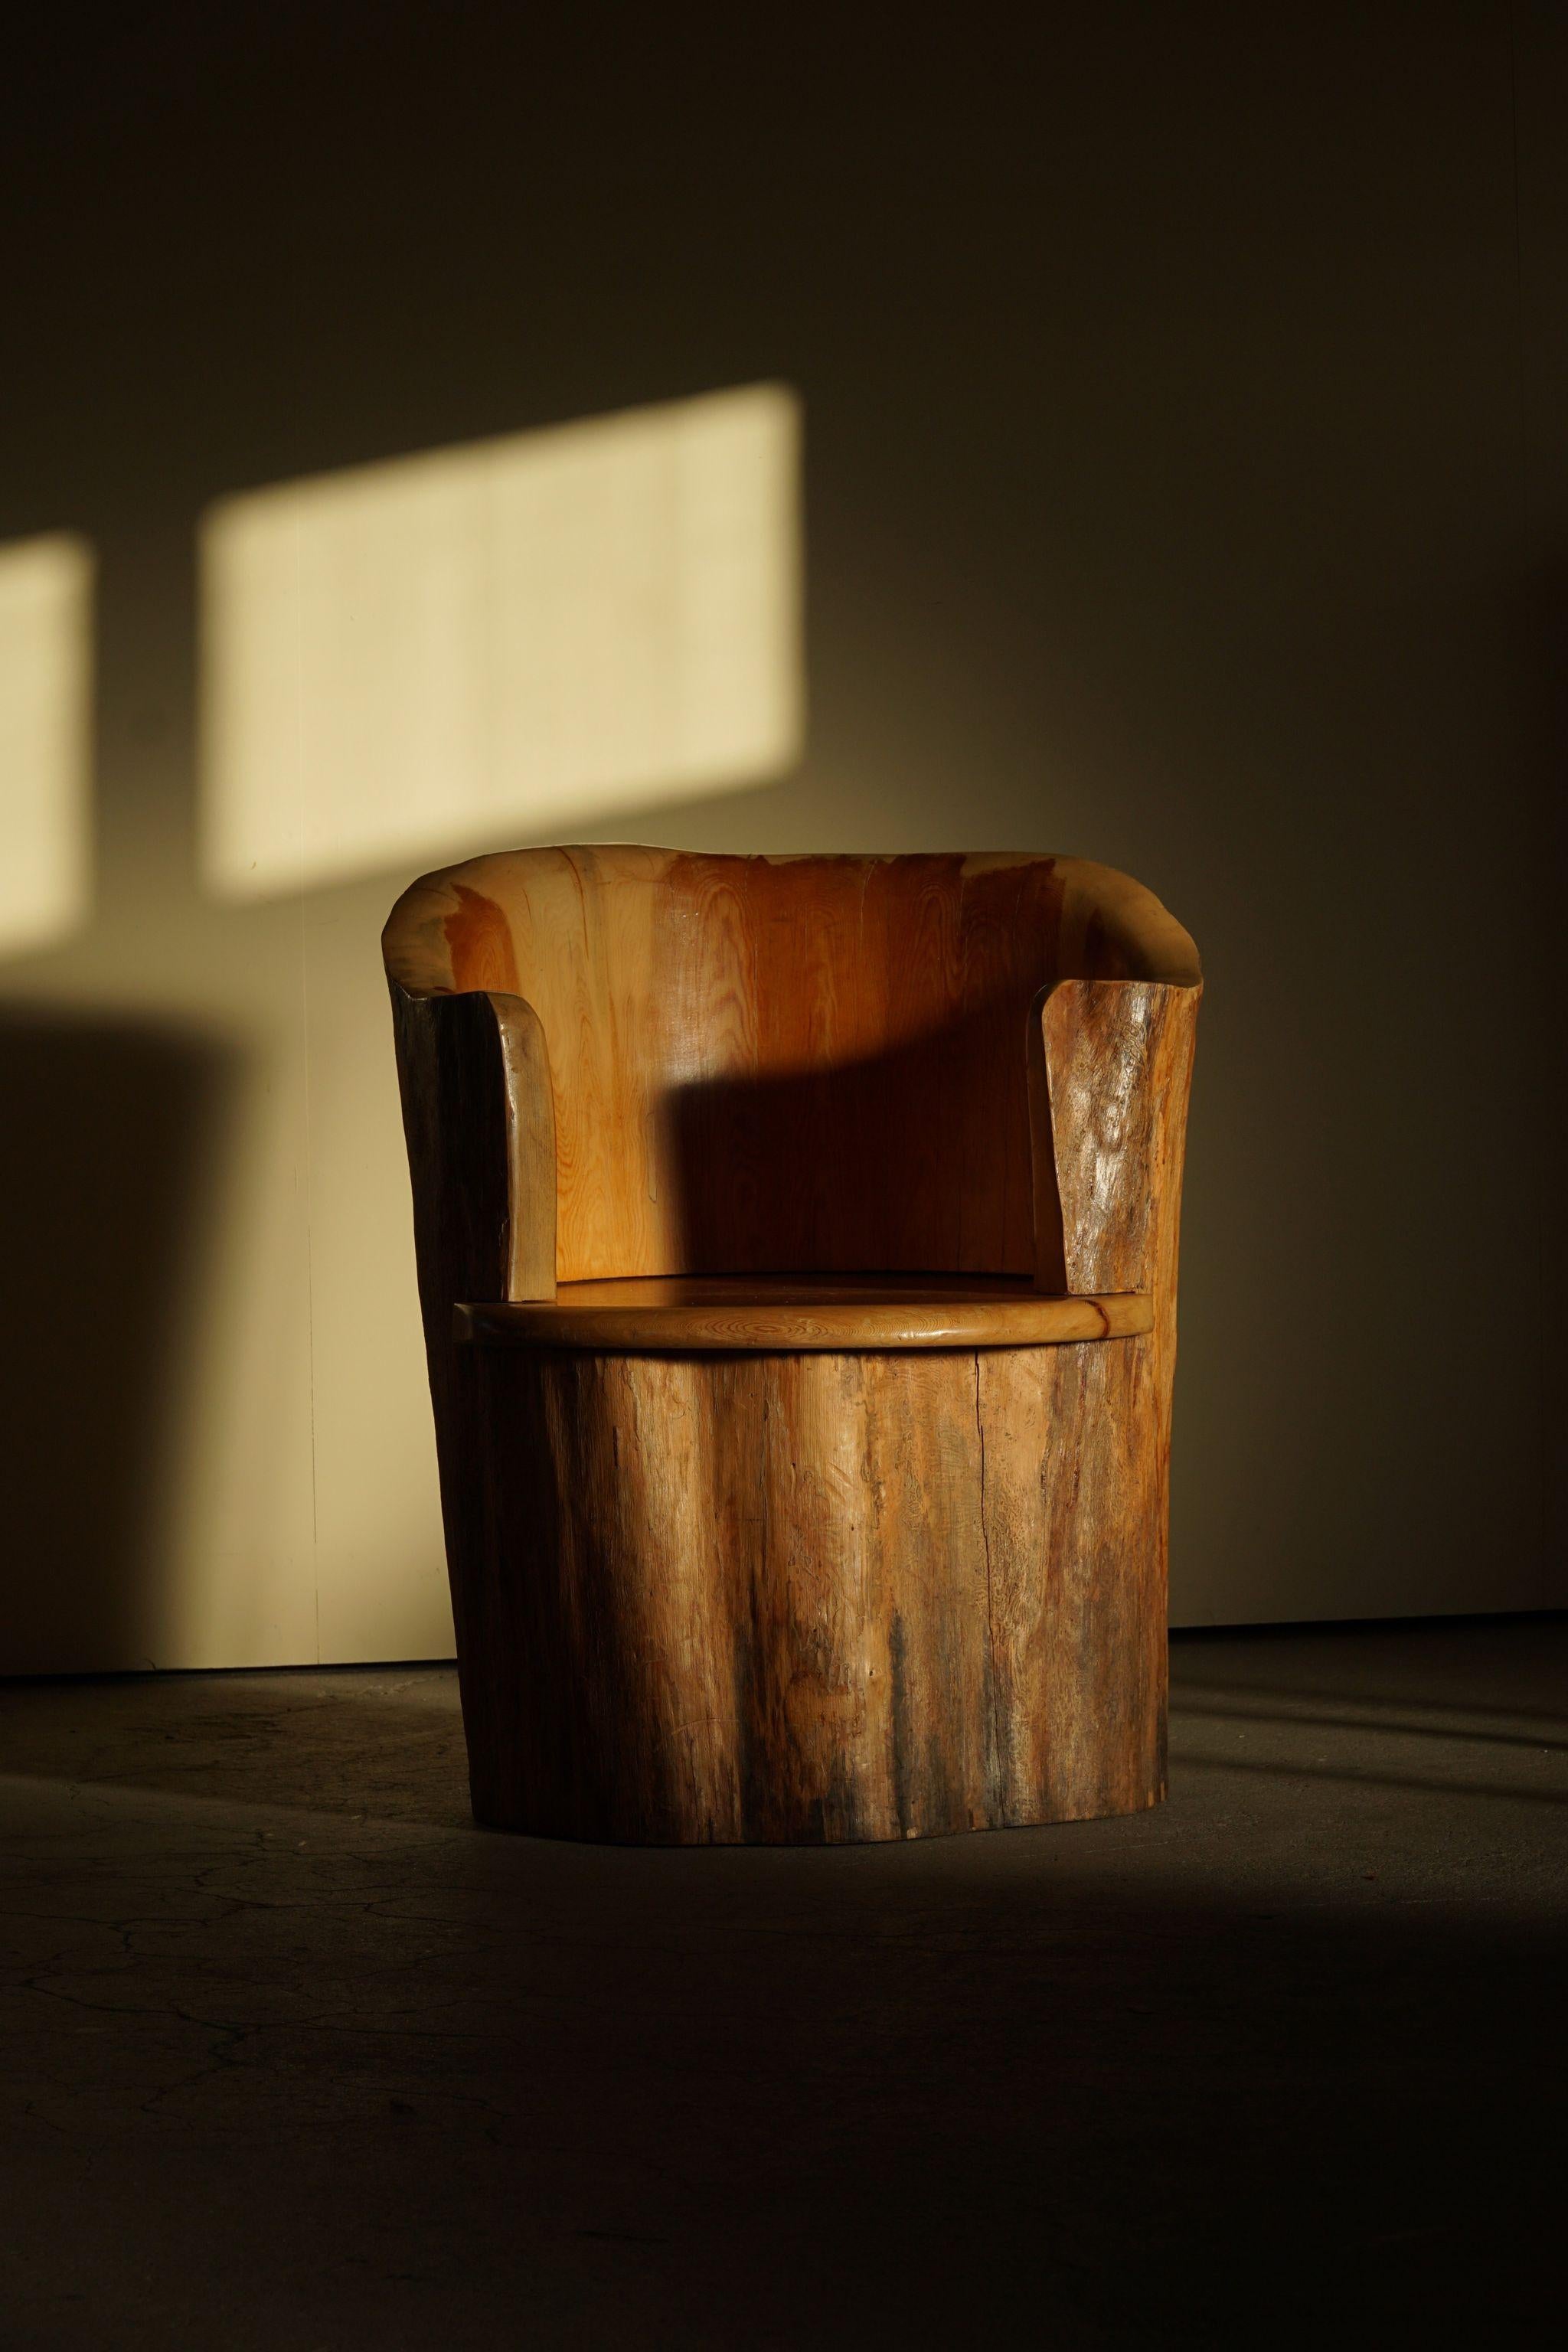 20th Century Sculptural Carved Wabi Sabi Brutalist Stump Chair in Solid Pine, Swedish, 1968 For Sale